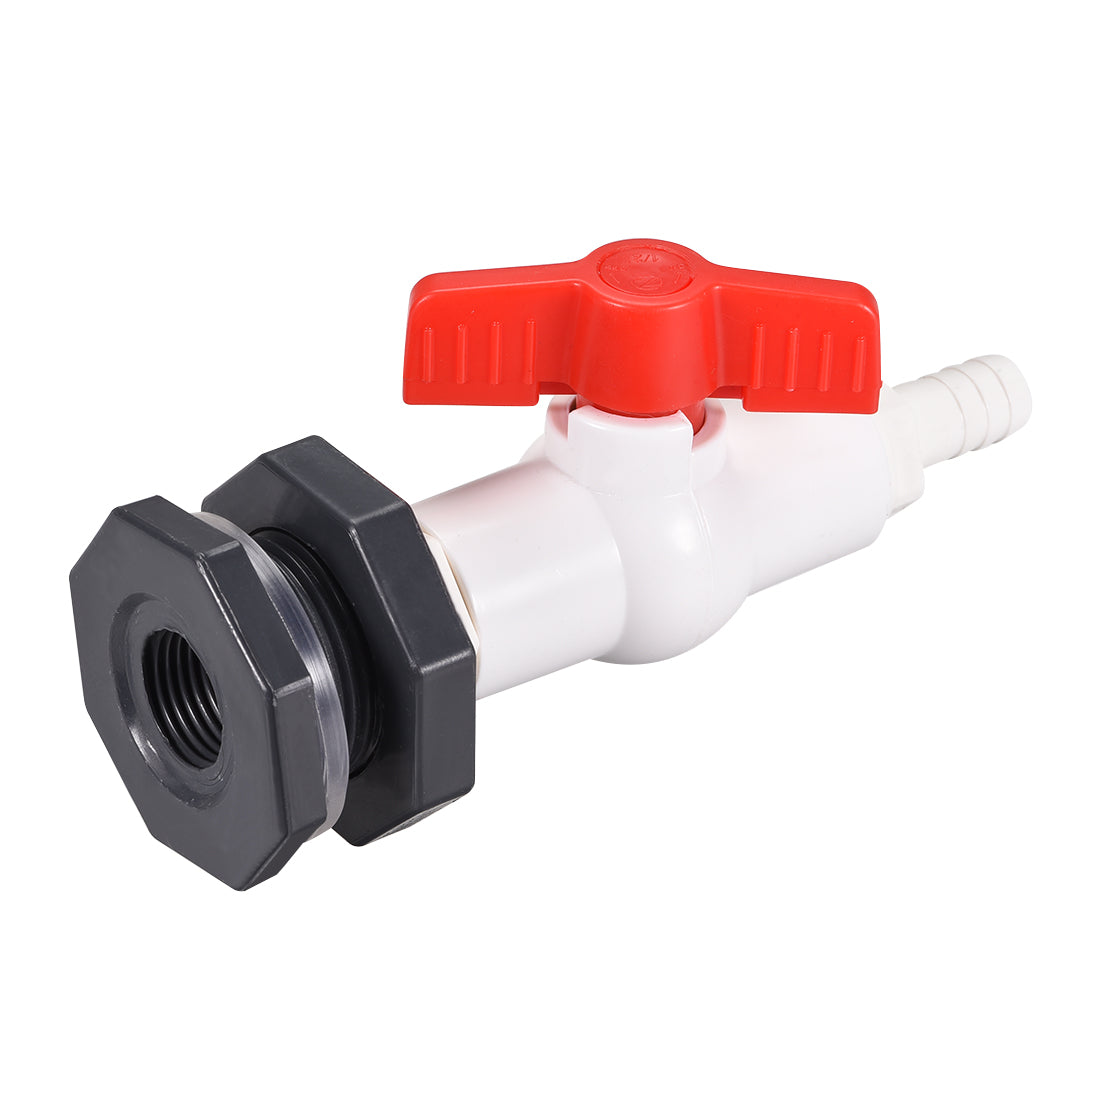 uxcell Uxcell ABS Ball Valve Pagoda Connector Spigot Kit, with Bulkhead Fitting Adapter, for Water Tank